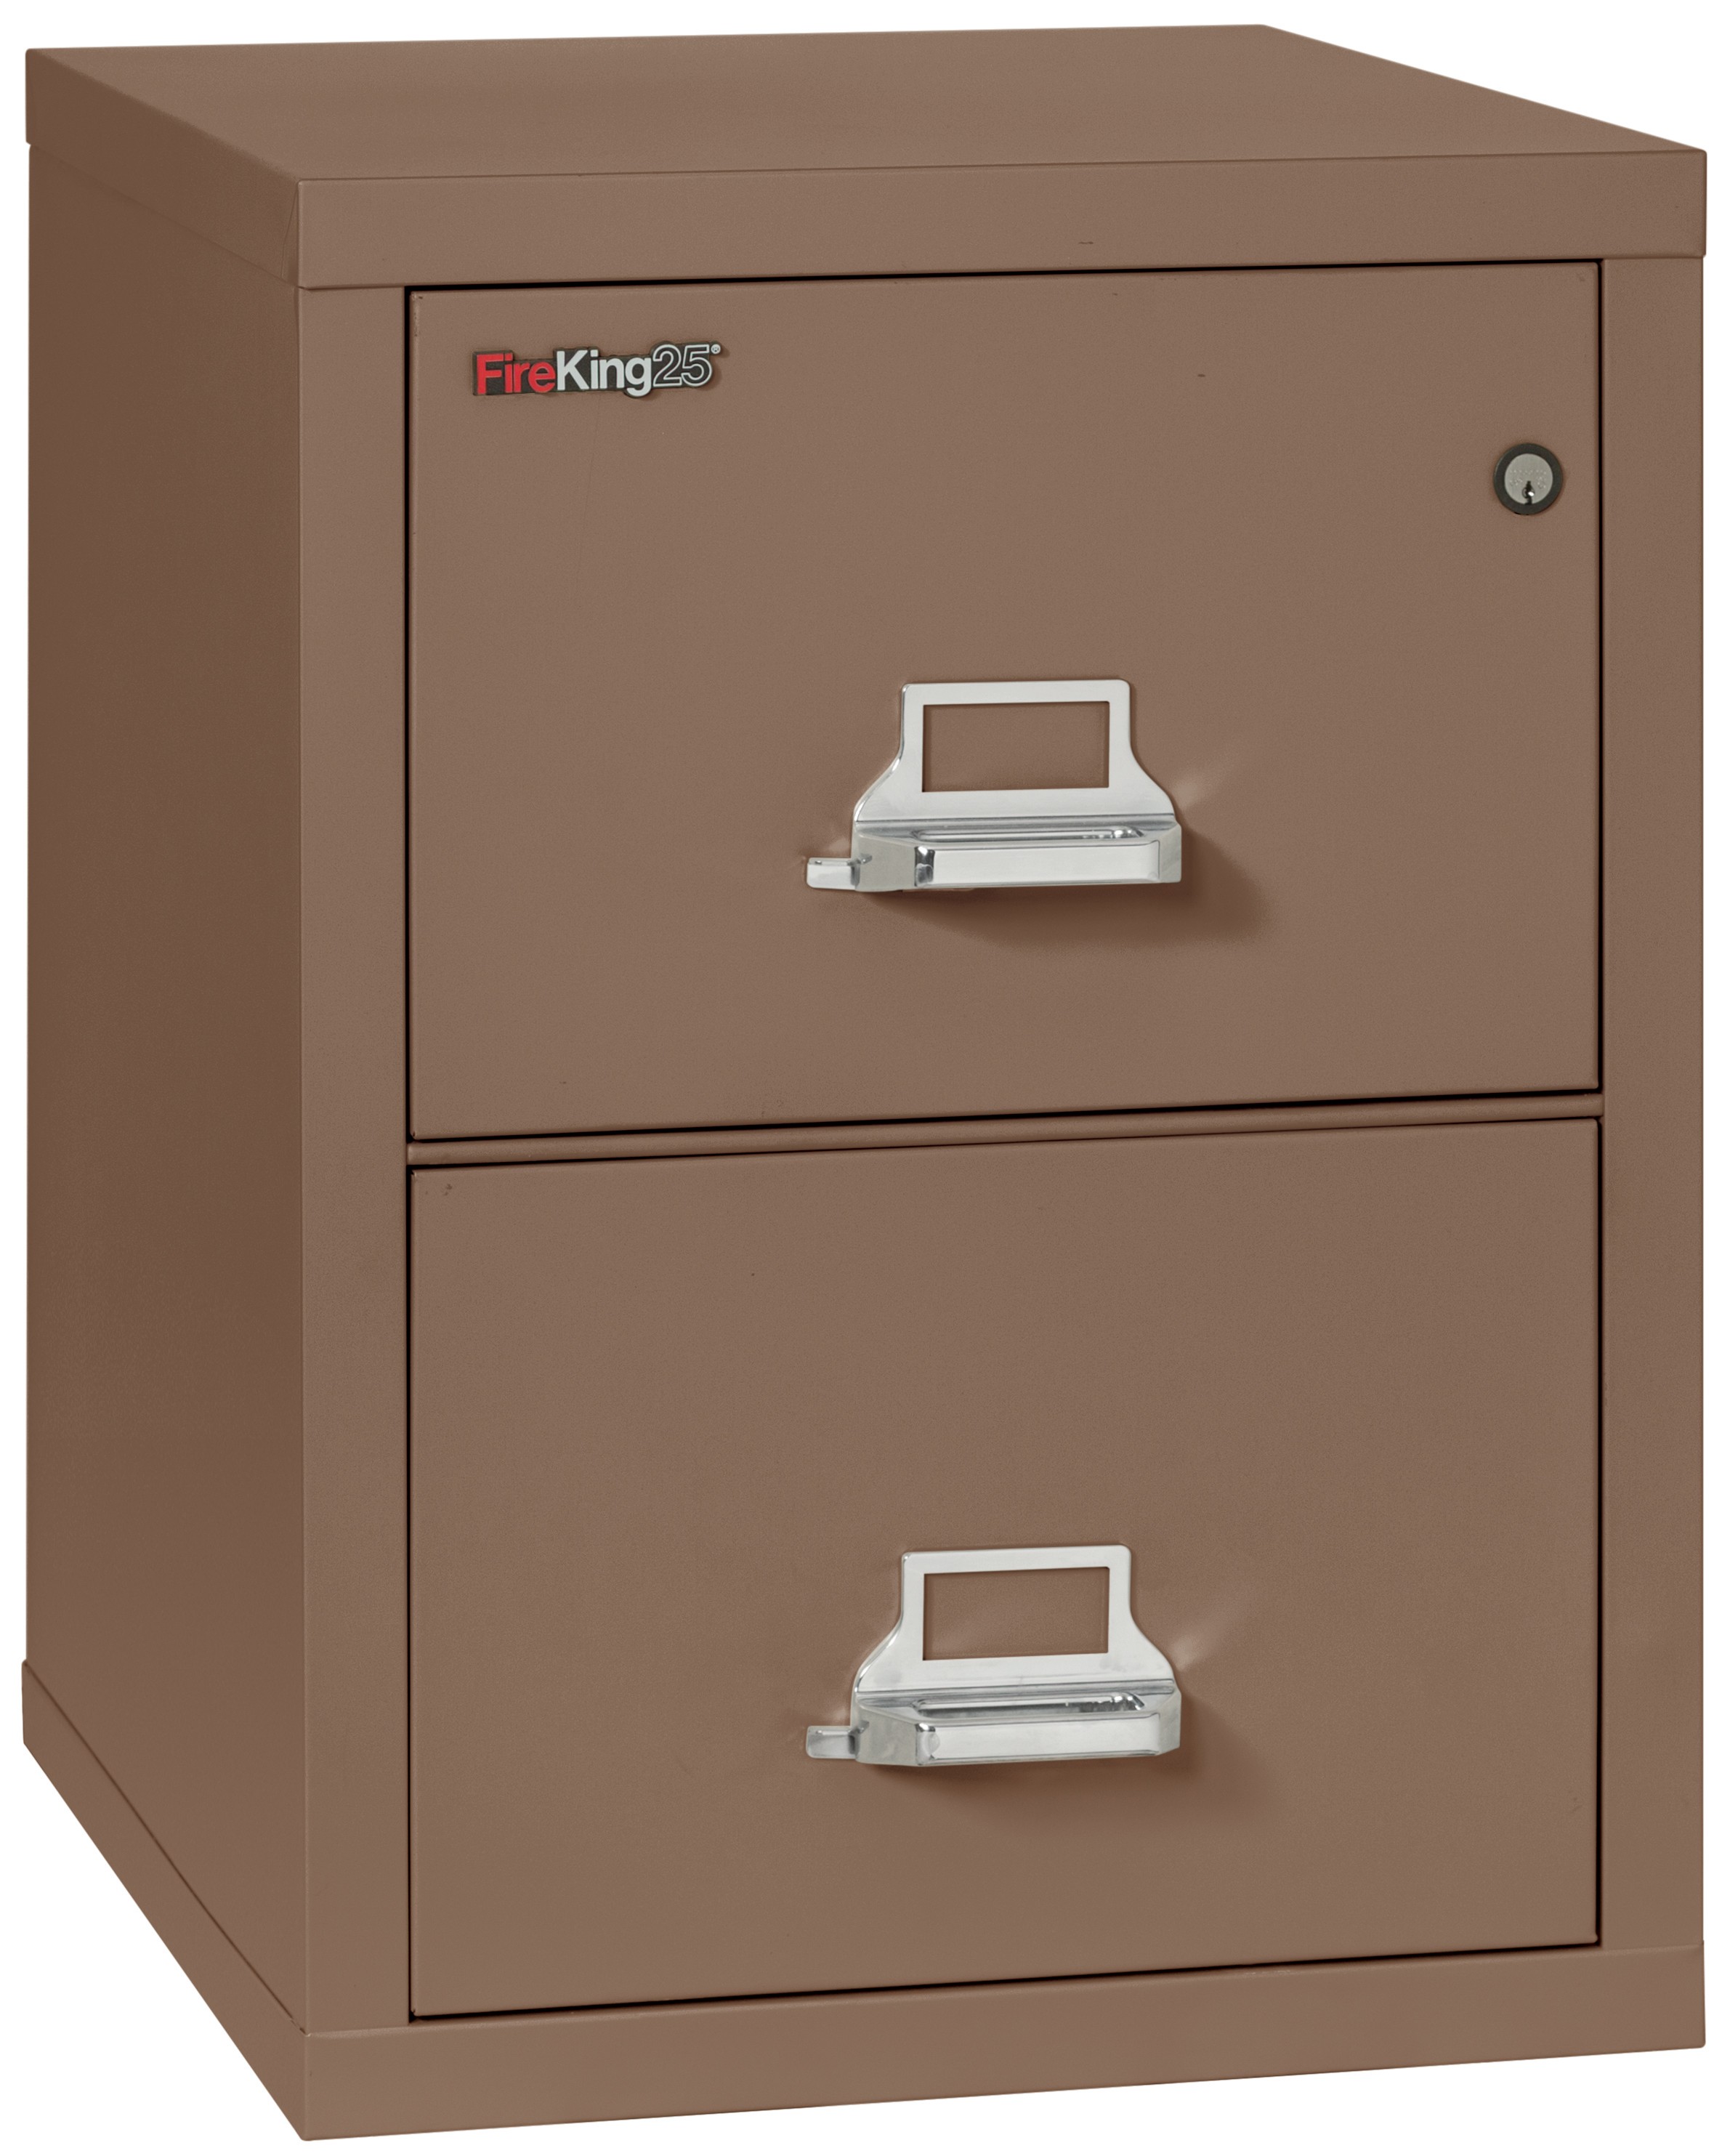 Fireking 2 Drawer Letter 25" D Classic Vertical fireproof File Cabinet-Tan - image 1 of 1